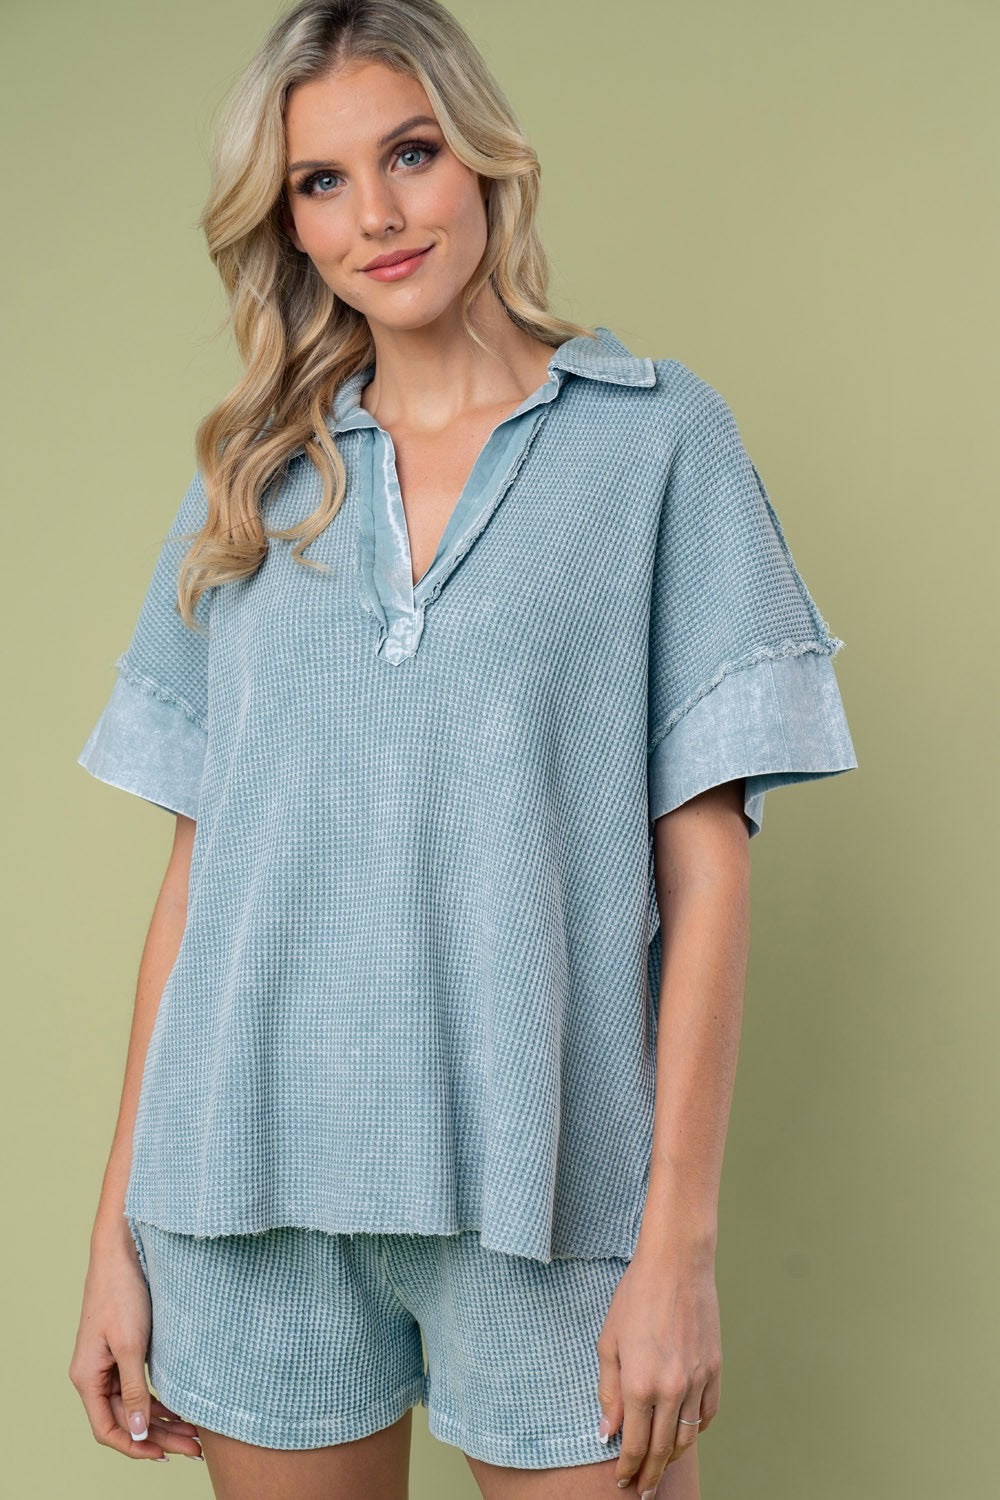 Collared Thermal Spring Top